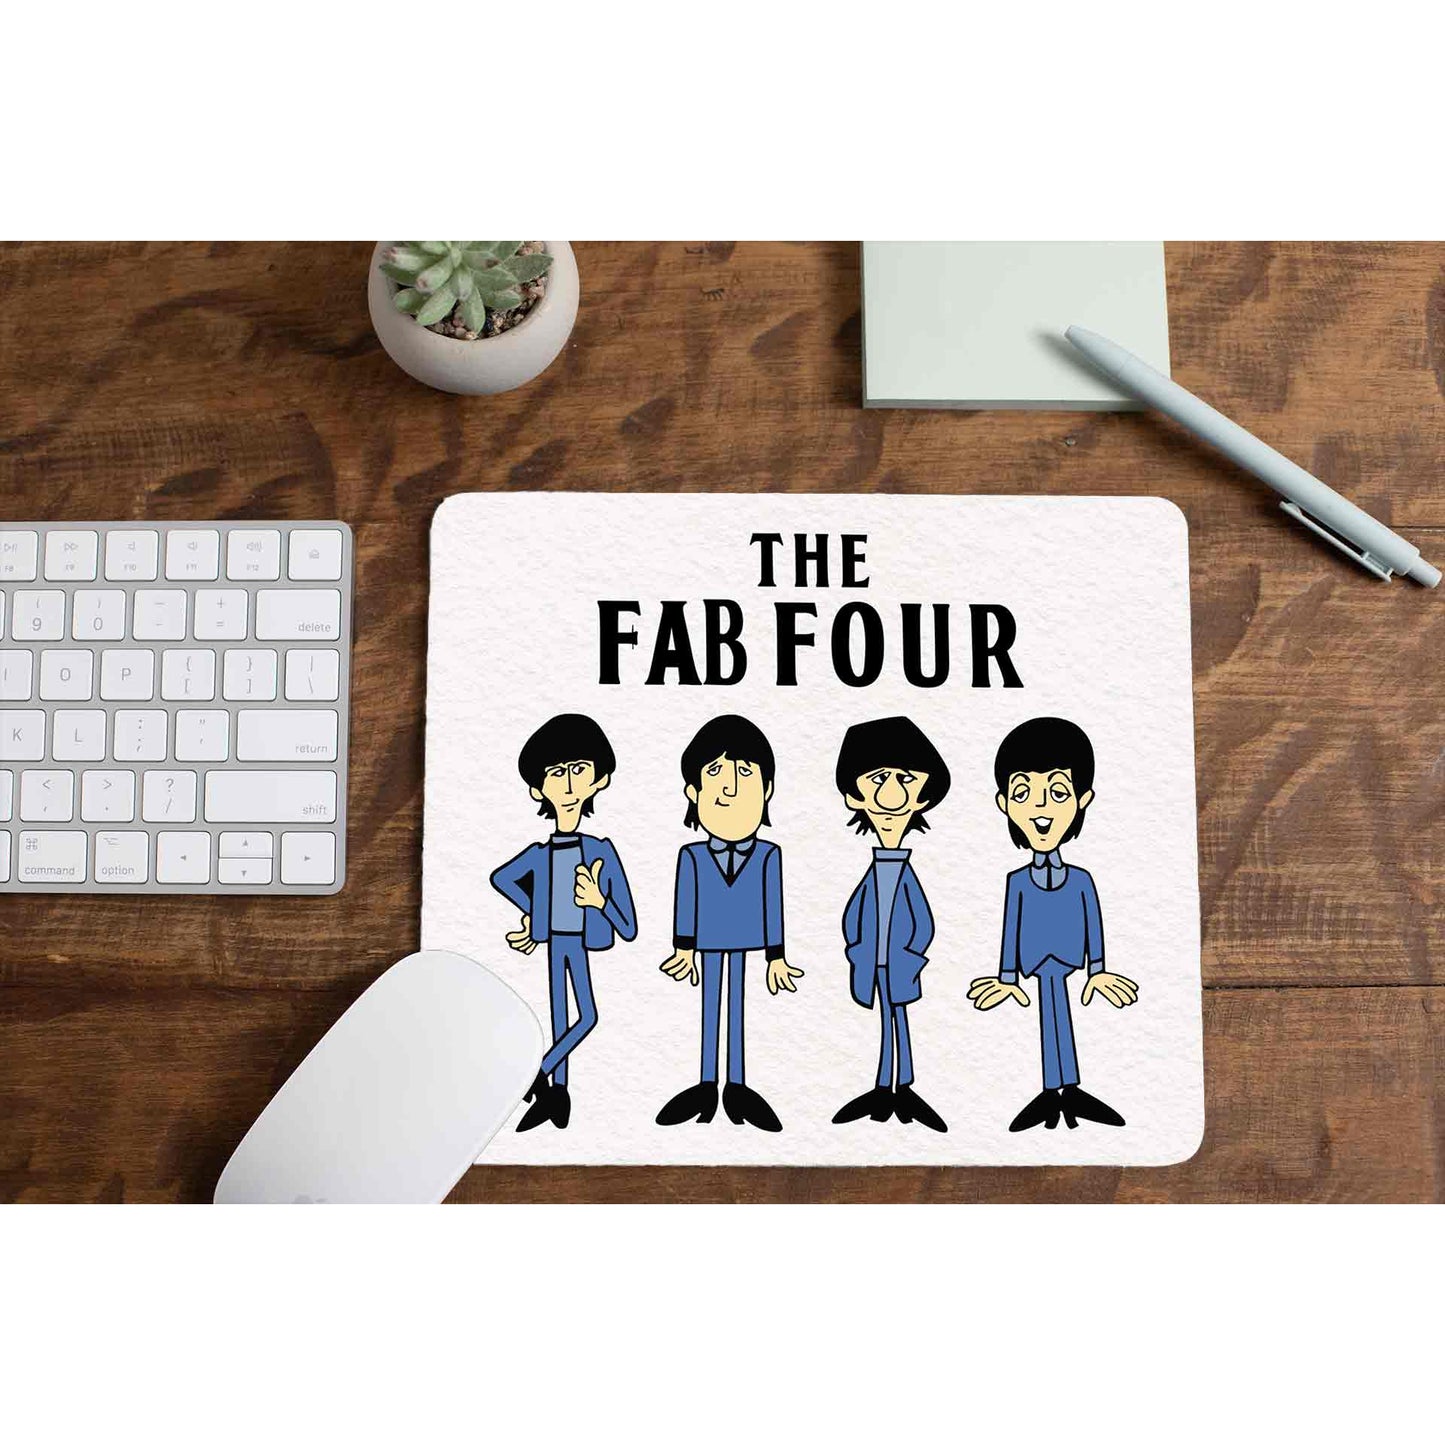 The Beatles Mousepad The Banyan Tee TBT Mouse pad computer accessory